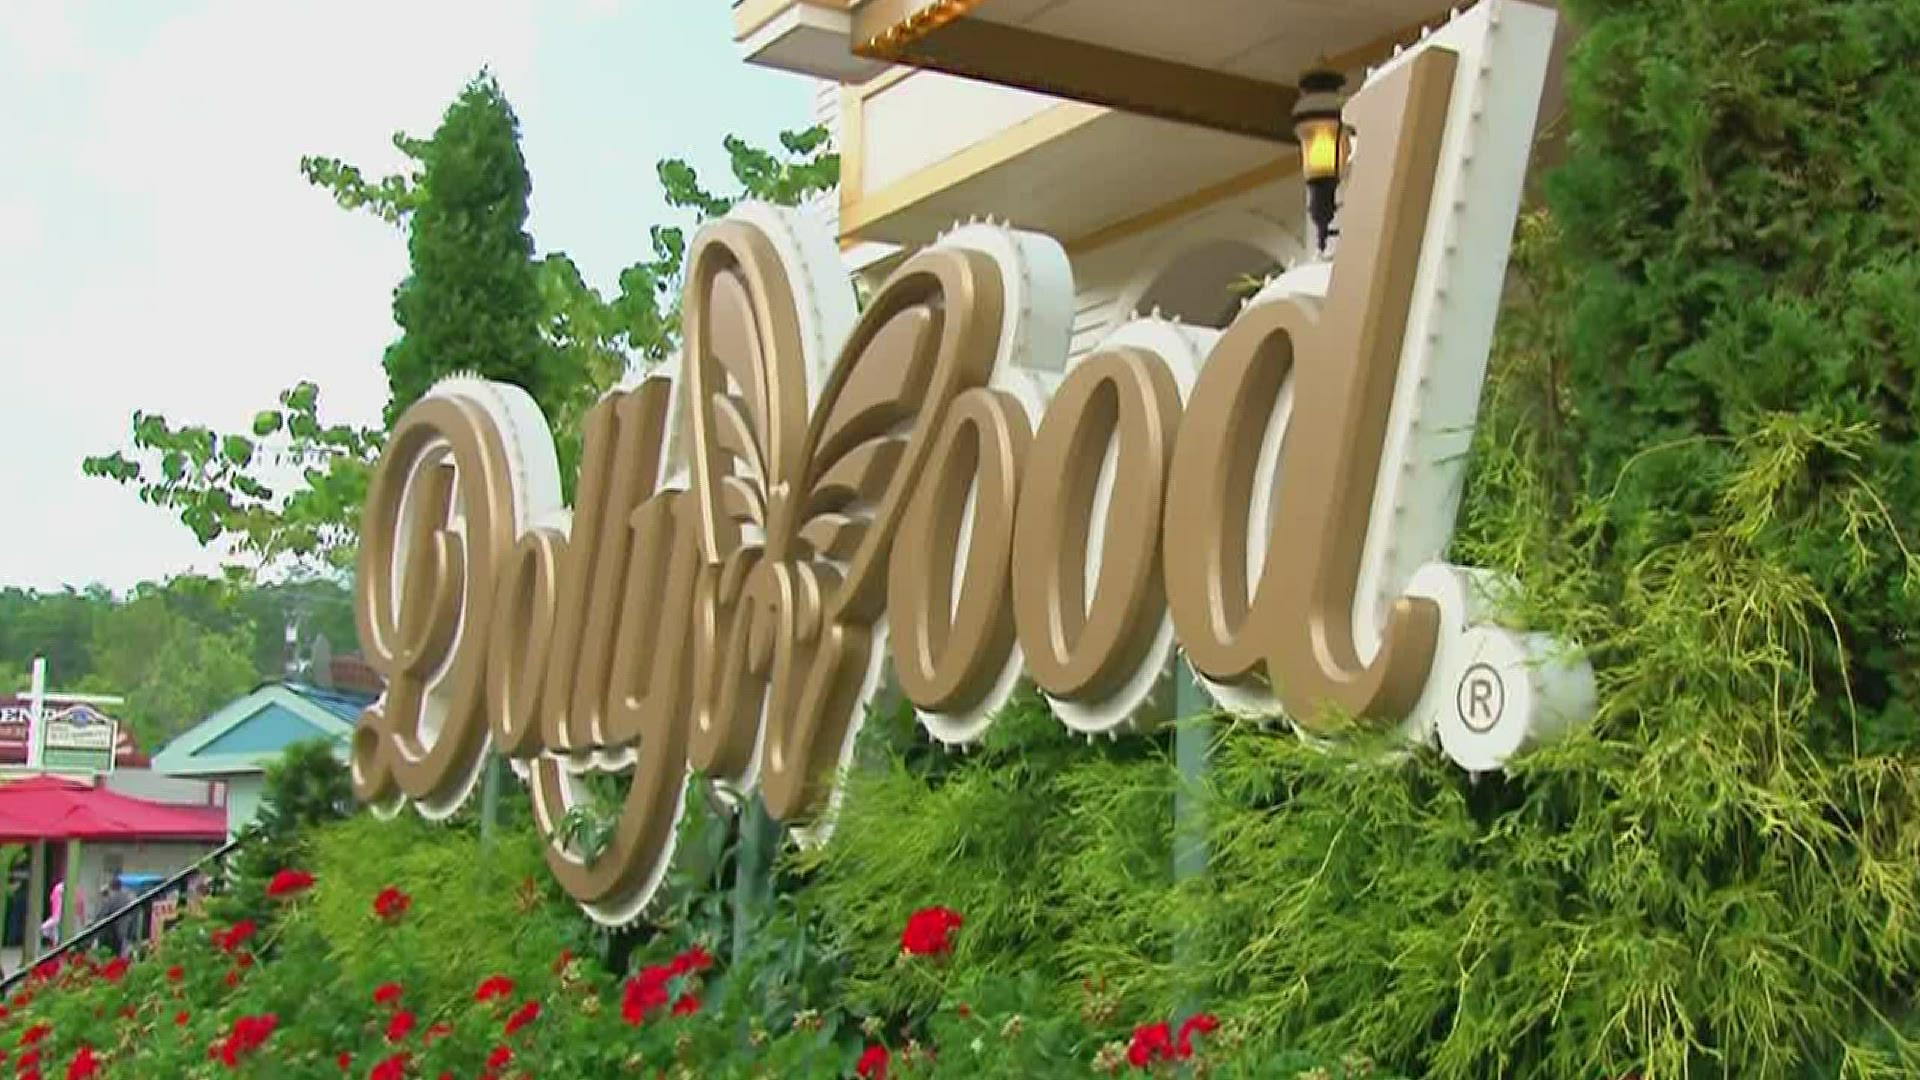 Dollywood said it is not sure when it will be able to safely reopen.